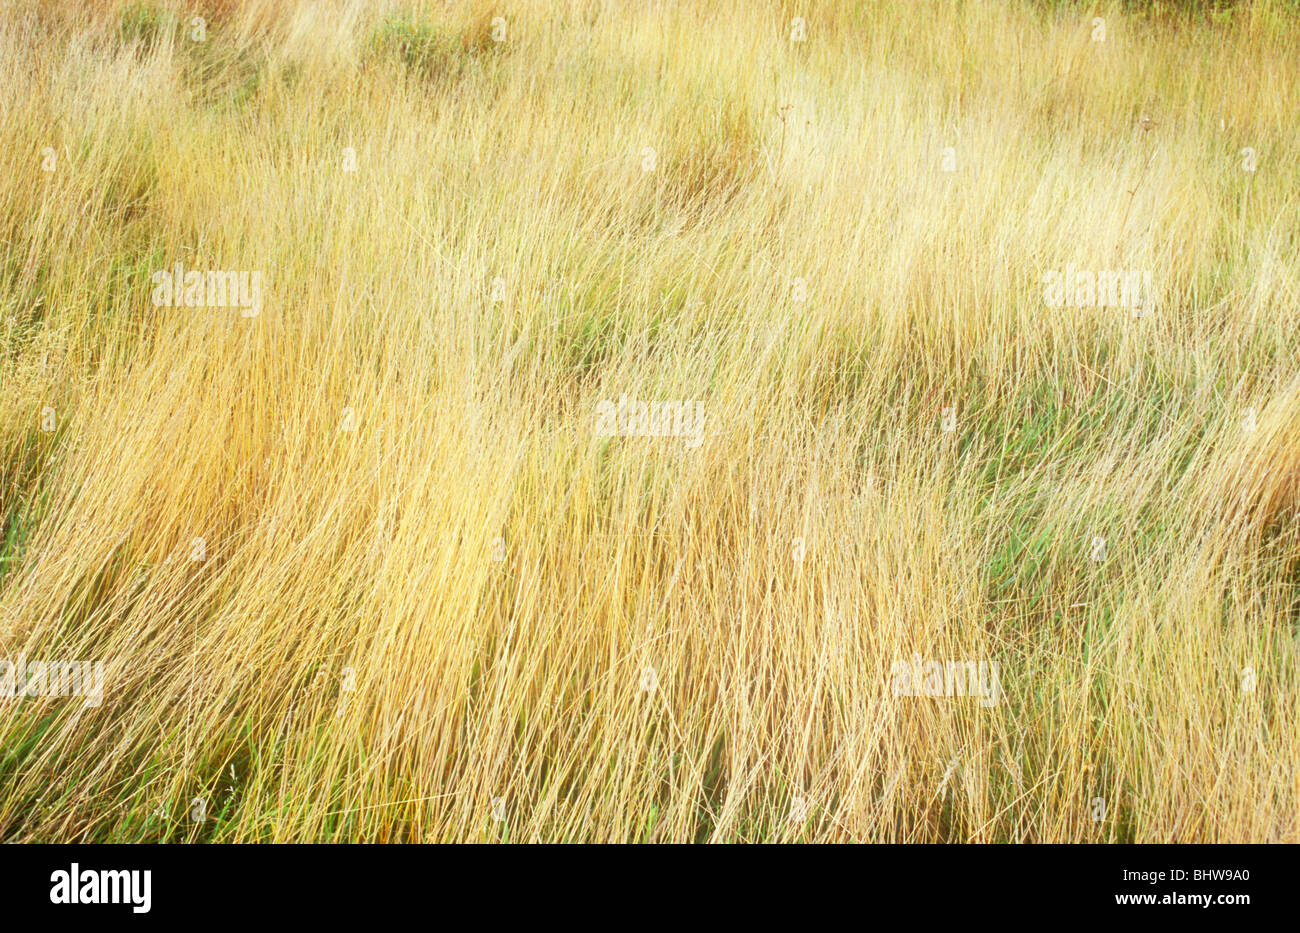 Tufts and swirls of long dry blonde grasses with patches of shorter green grass visible Stock Photo